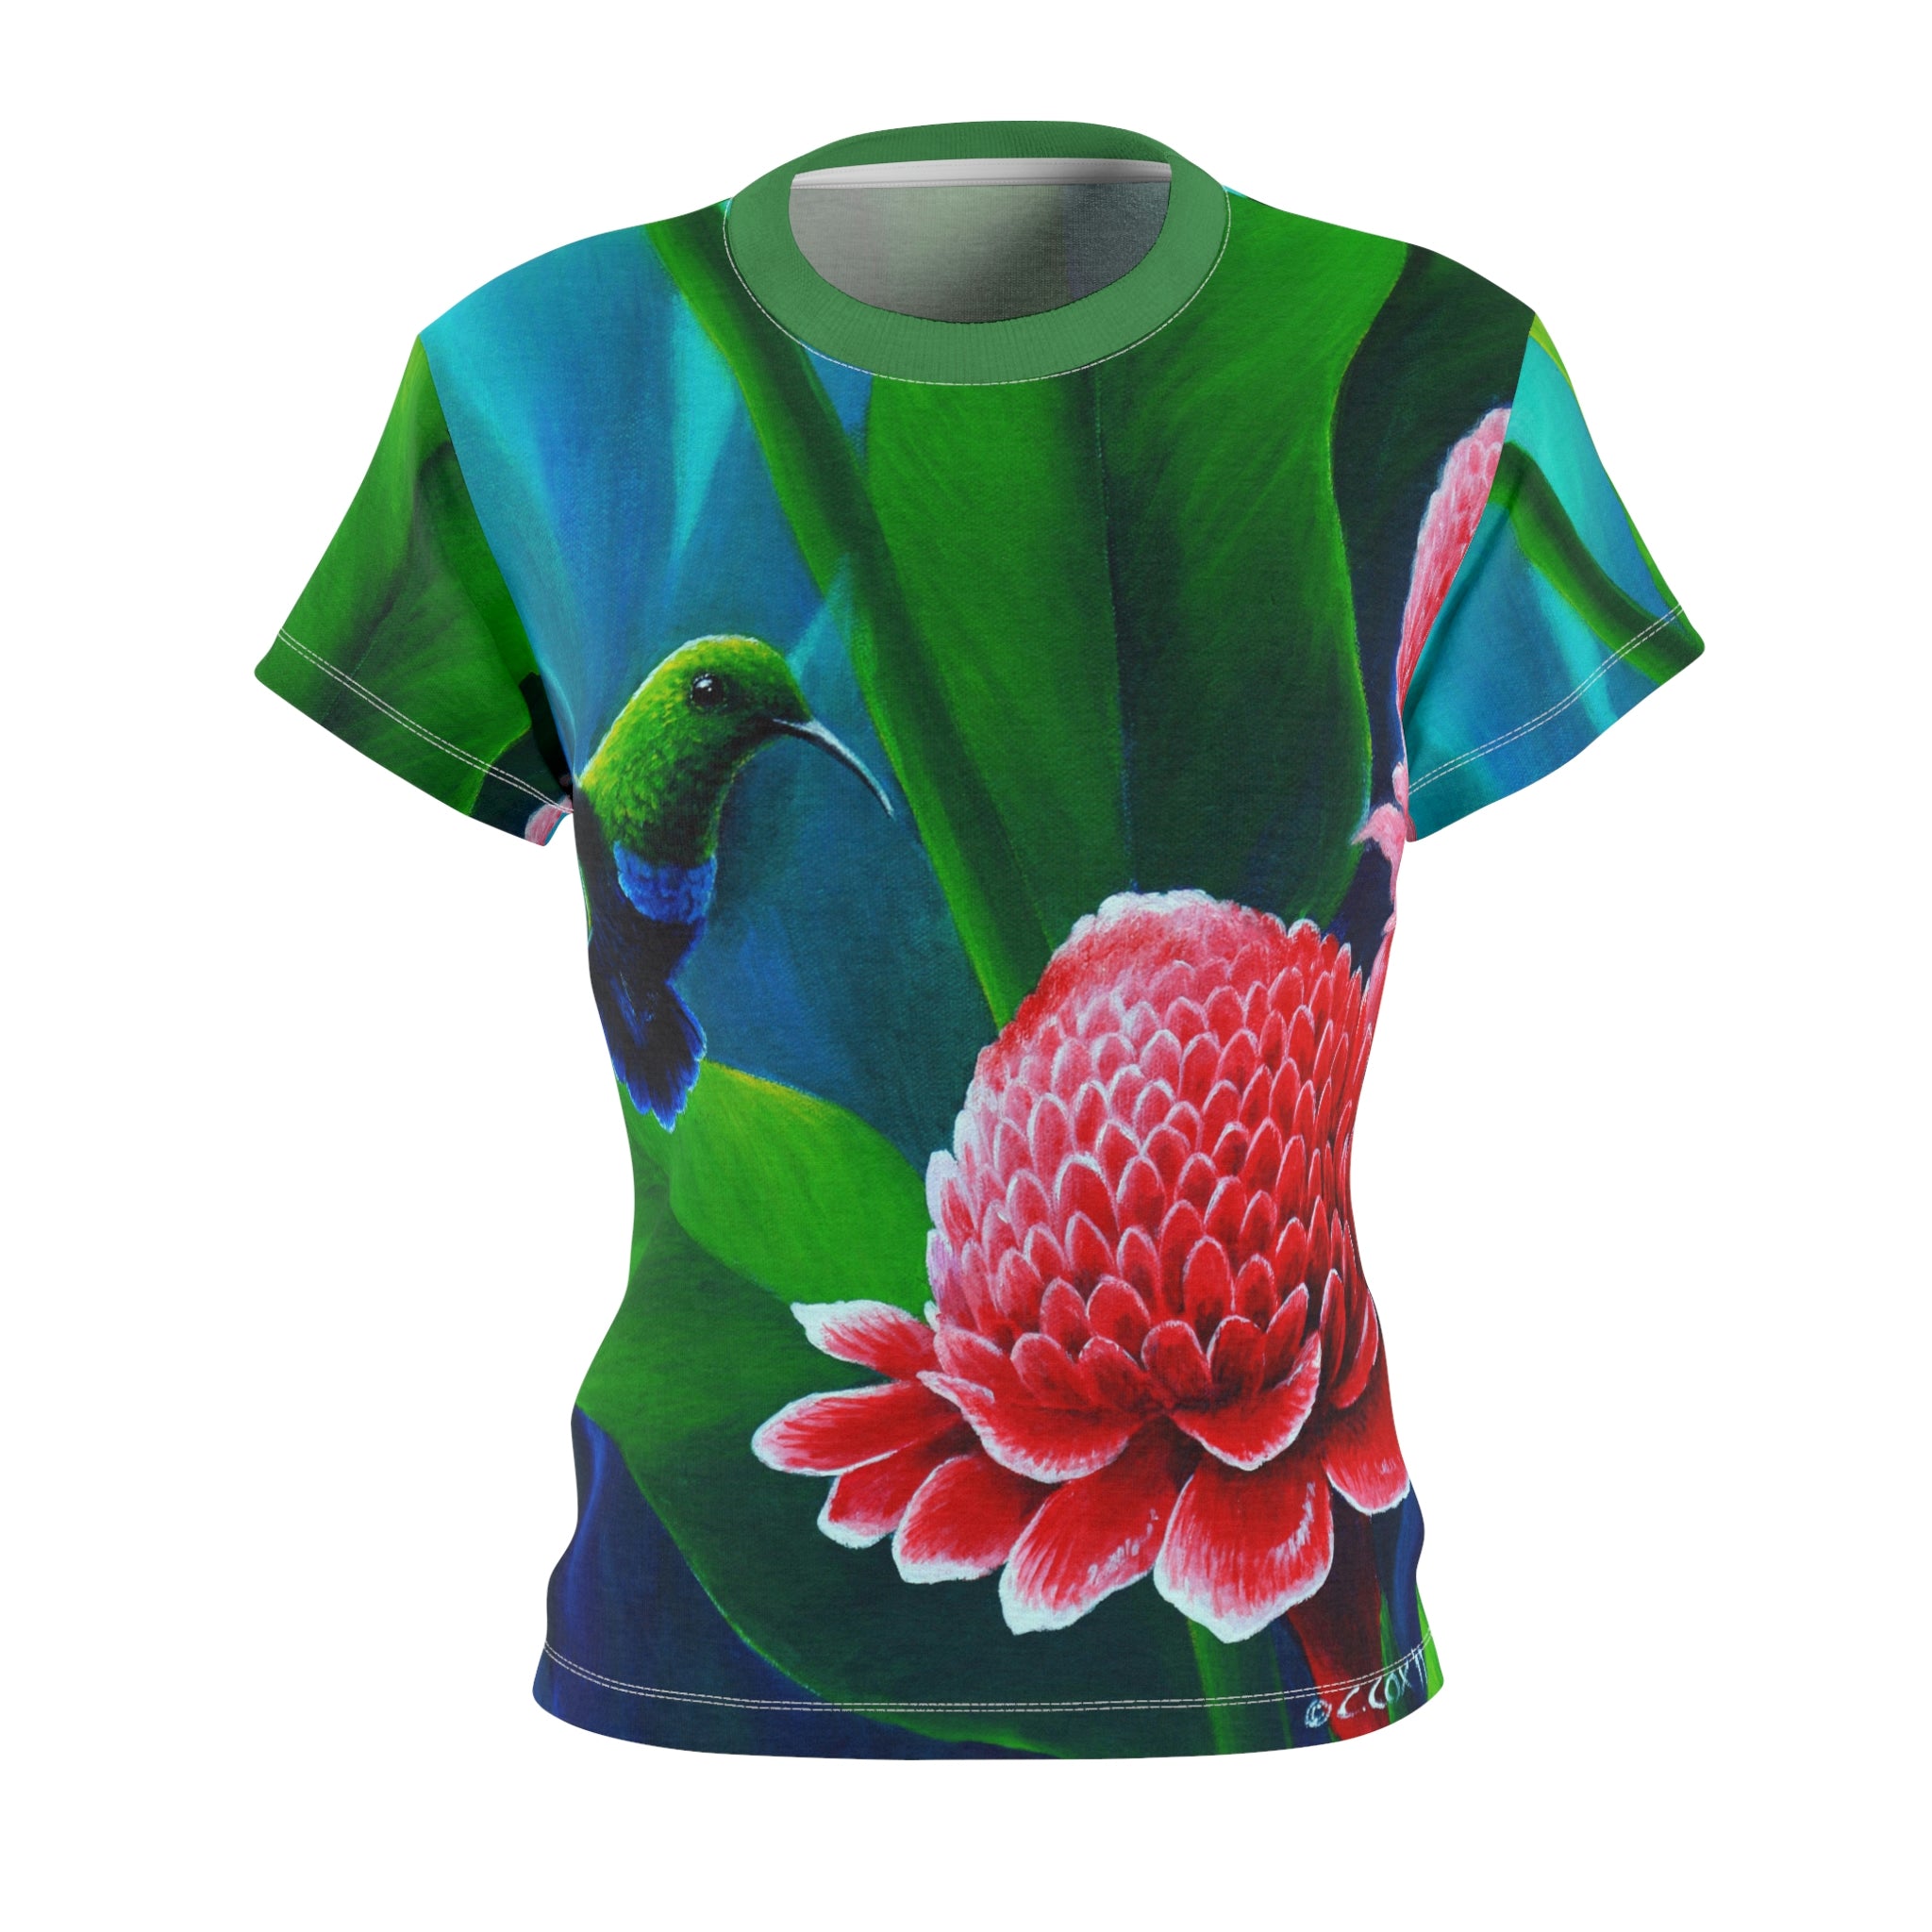 Green-throated Carib and Yellow hibiscus, Women's Cut & Sew Tee (AOP), Original artwork by Christopher Cox